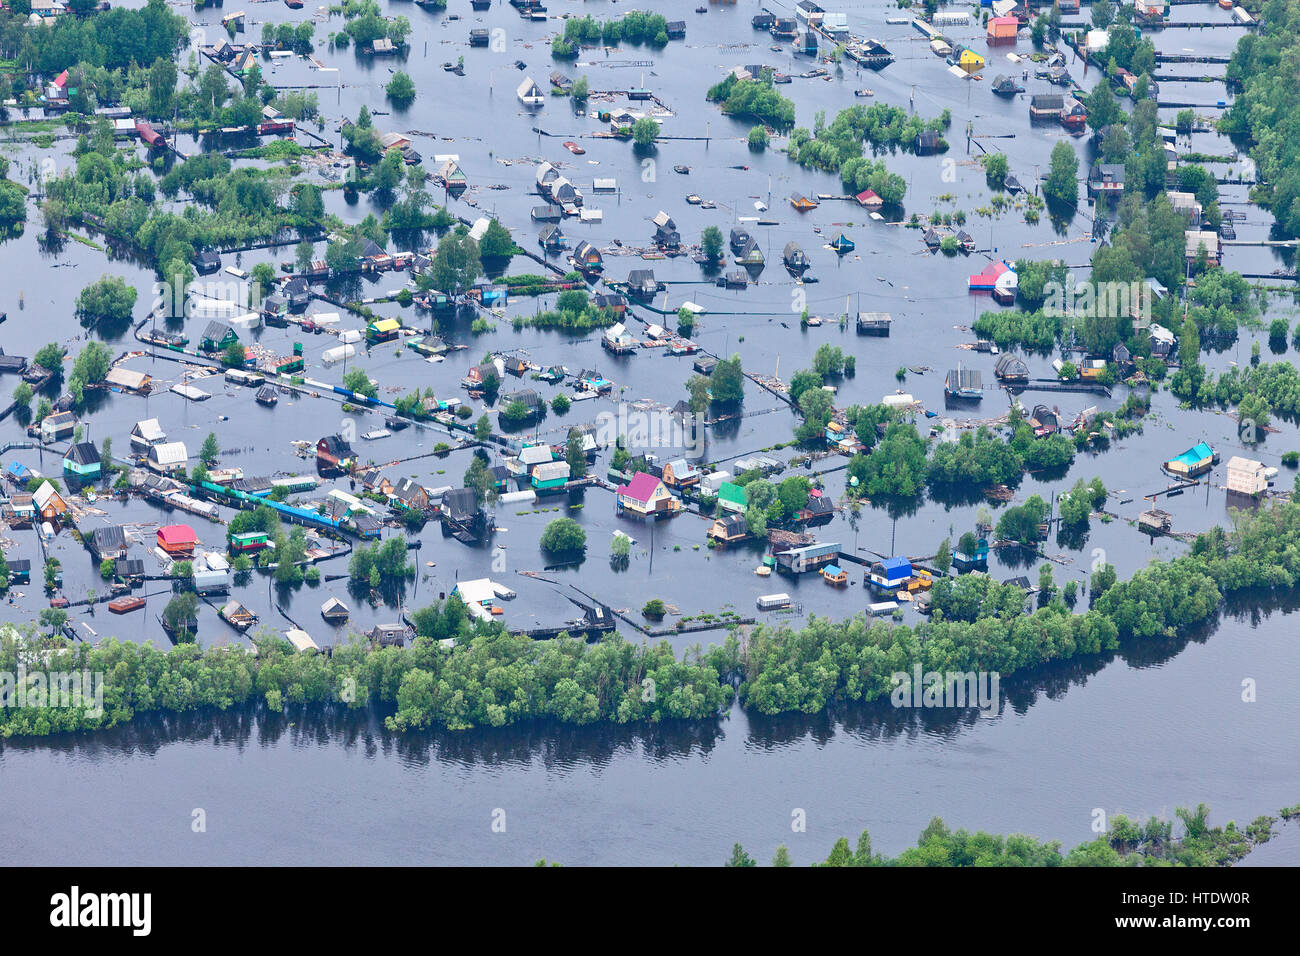 Flooded village in lowland of Great river Stock Photo